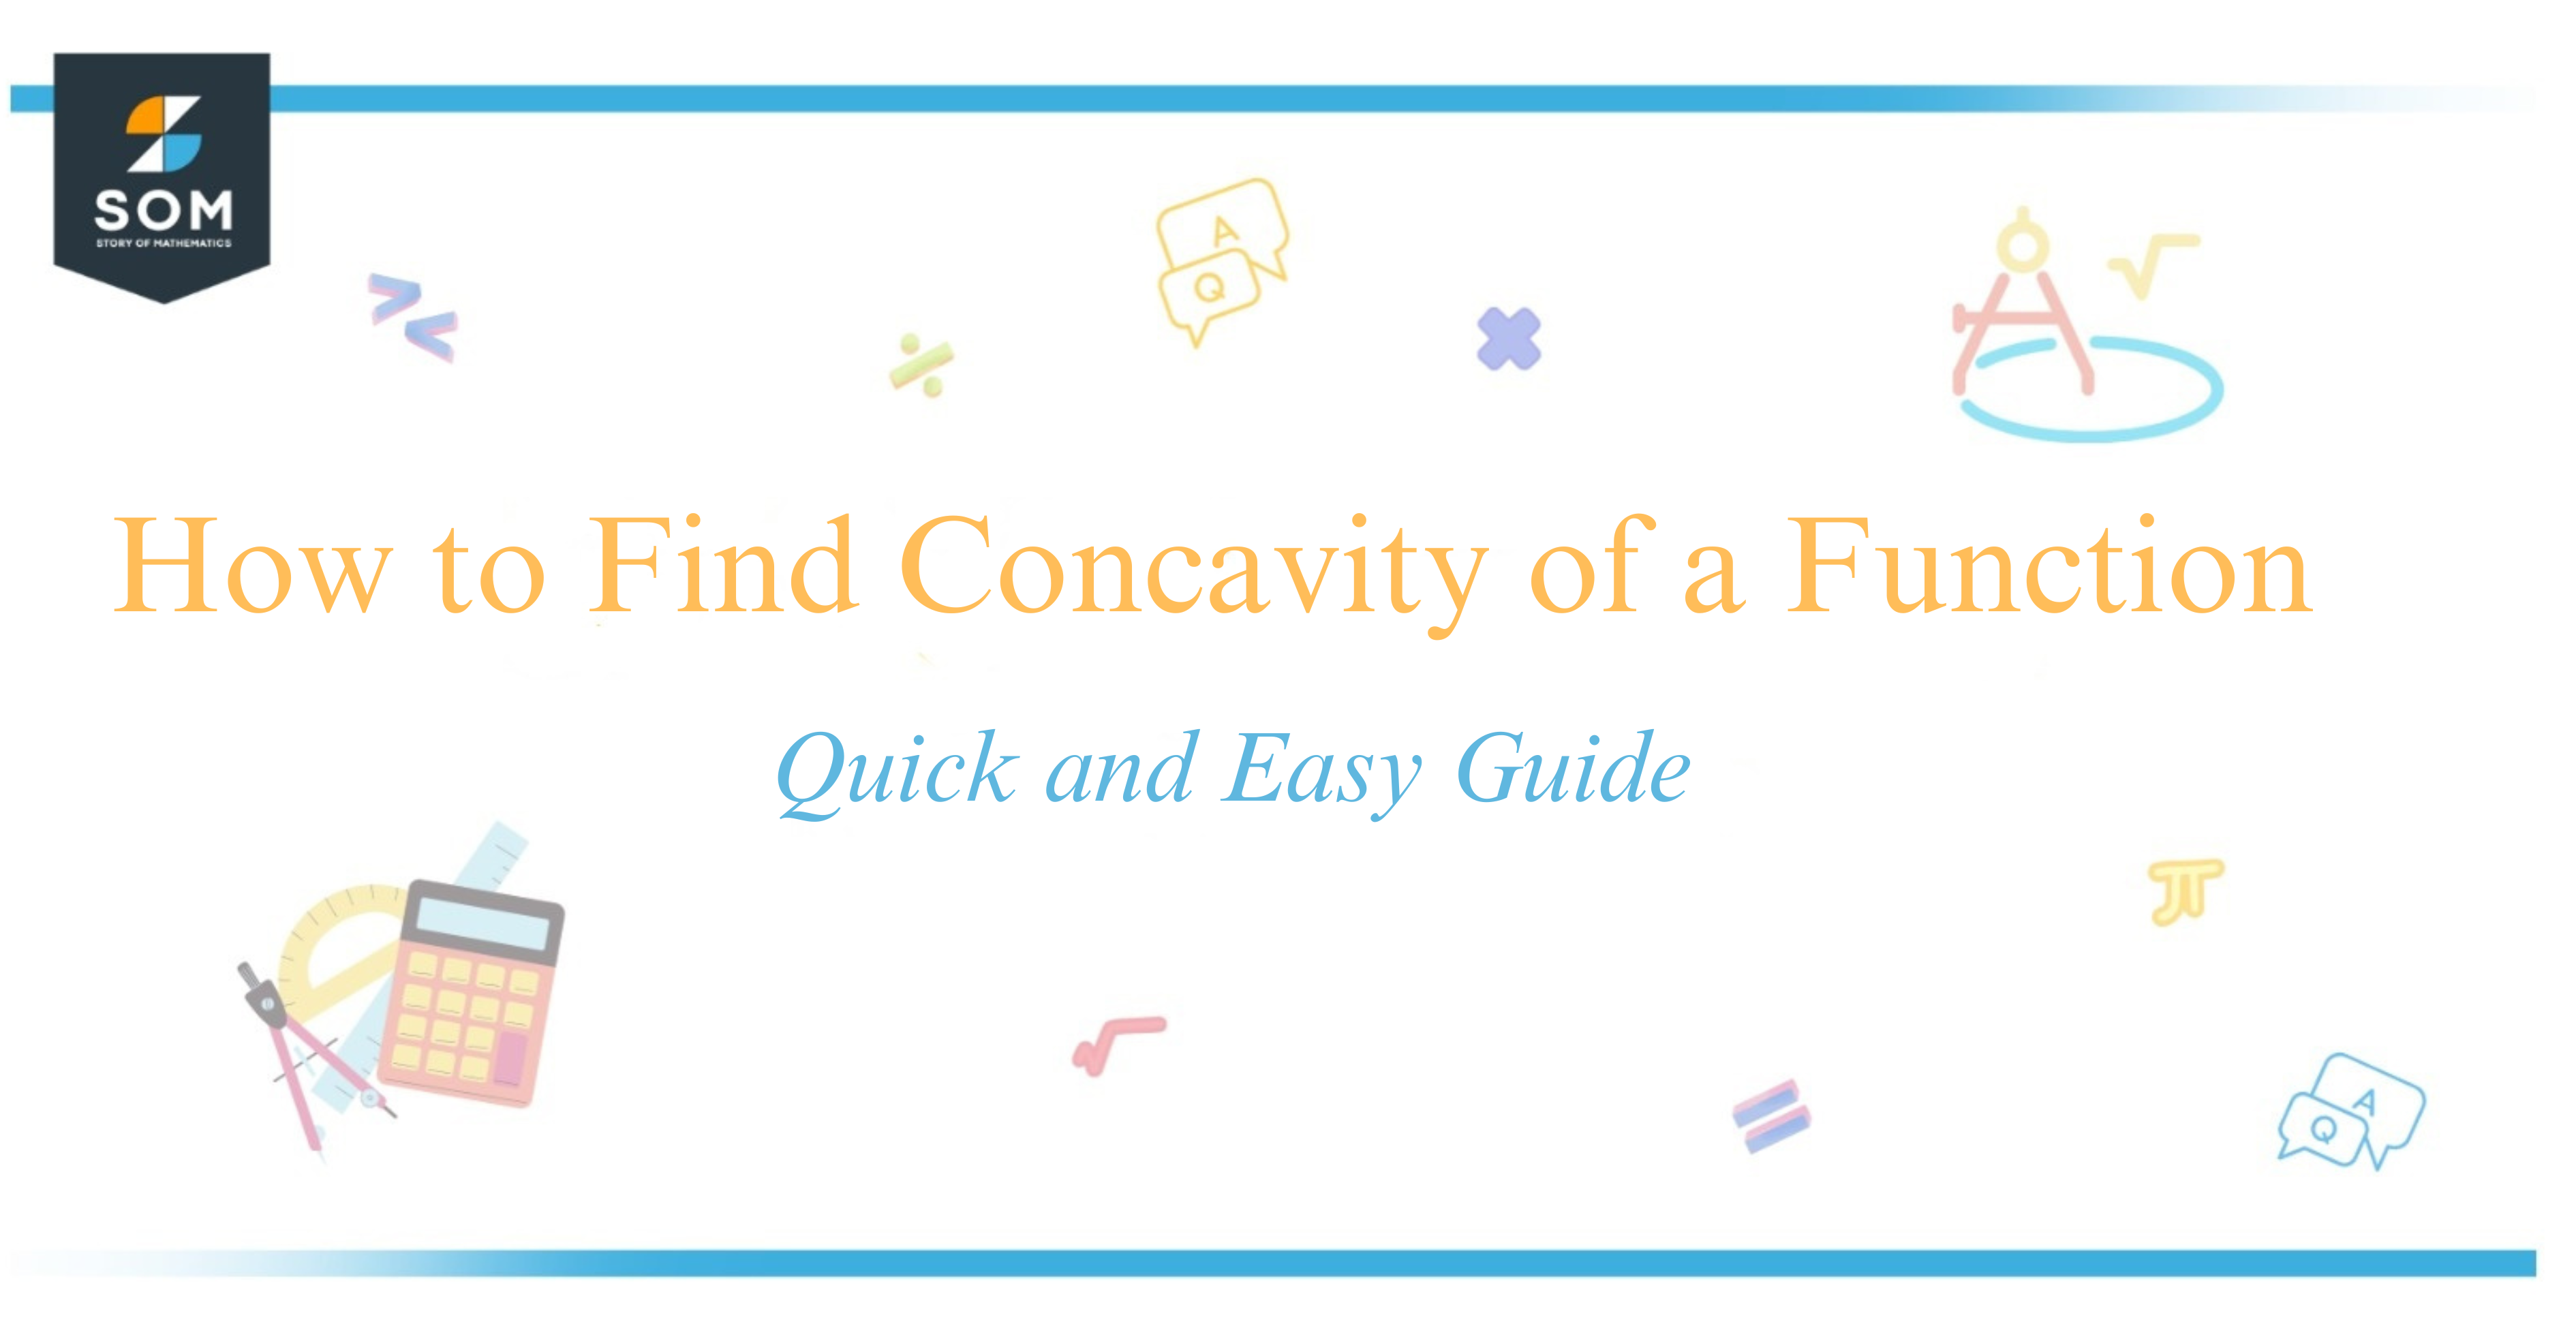 How to Find Concavity of a Function Quick and Easy Guide